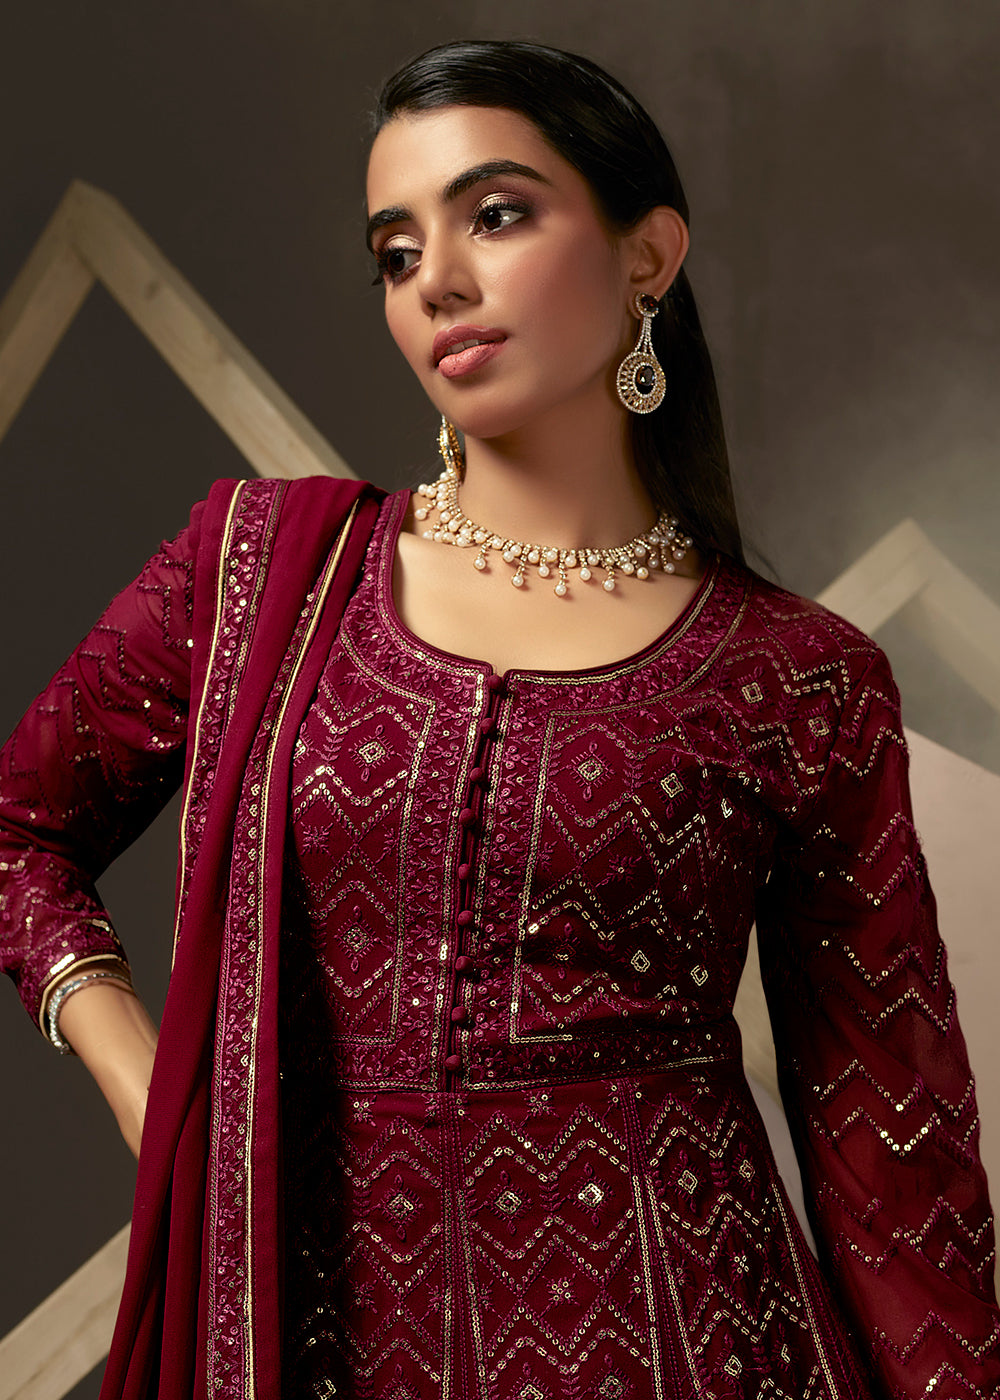 Buy Now Swanky Maroon Lucknowi Style Embroidered Georgette Gown Online in USA, UK, Australia, New Zealand, Canada & Worldwide at Empress Clothing.